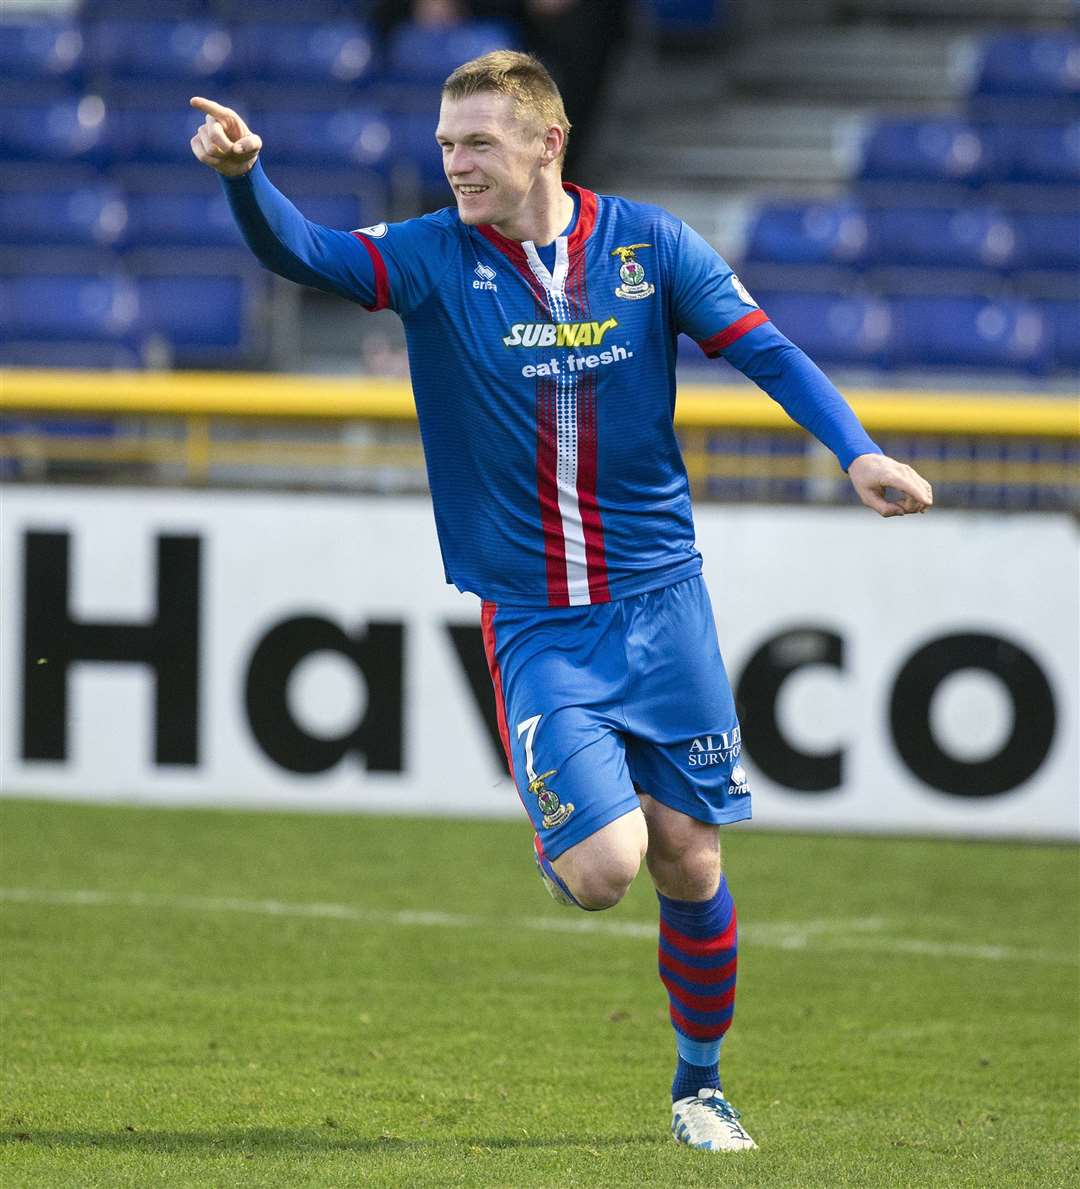 Royalty - Ken Macpherson, Inverness..Inverness CT v Motherwell.  11.22.14 .. The celebrity lens of ICT's Billy McKay.